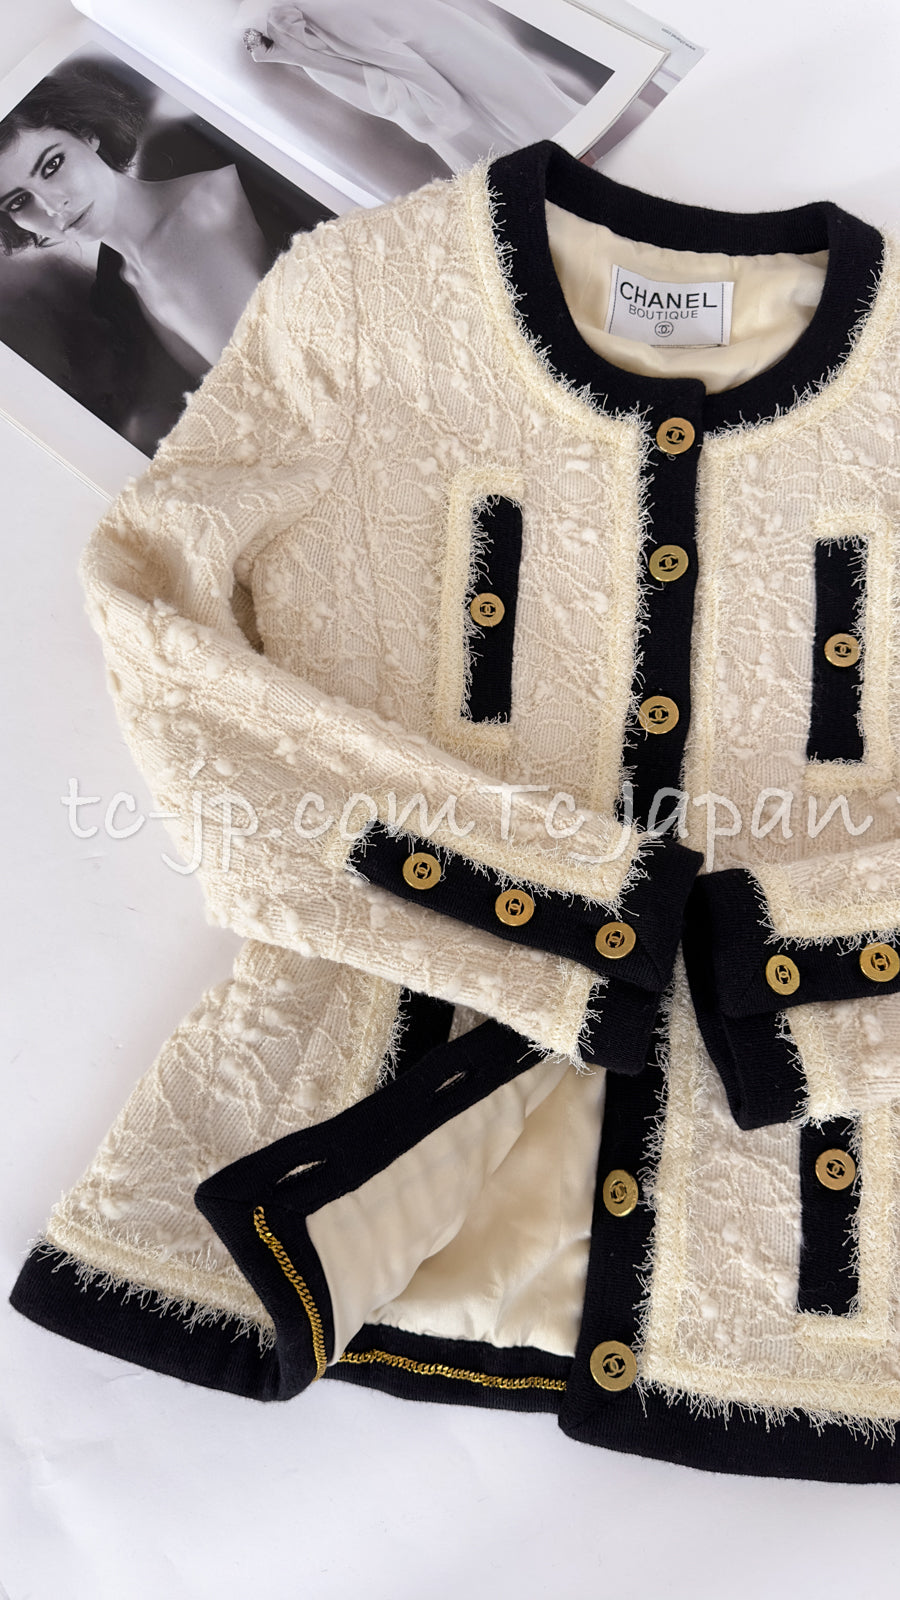 CHANEL 94A An Extremely Rare Collectible Signature Boucle Creme Ivory Black Trim Vintage Jacket 34 36 38 シャネル スーパーモデルの幻 ヴィンテージ・ブークレ・クリーム・アイボリー・ブラック・トリム・ジャケット 即発